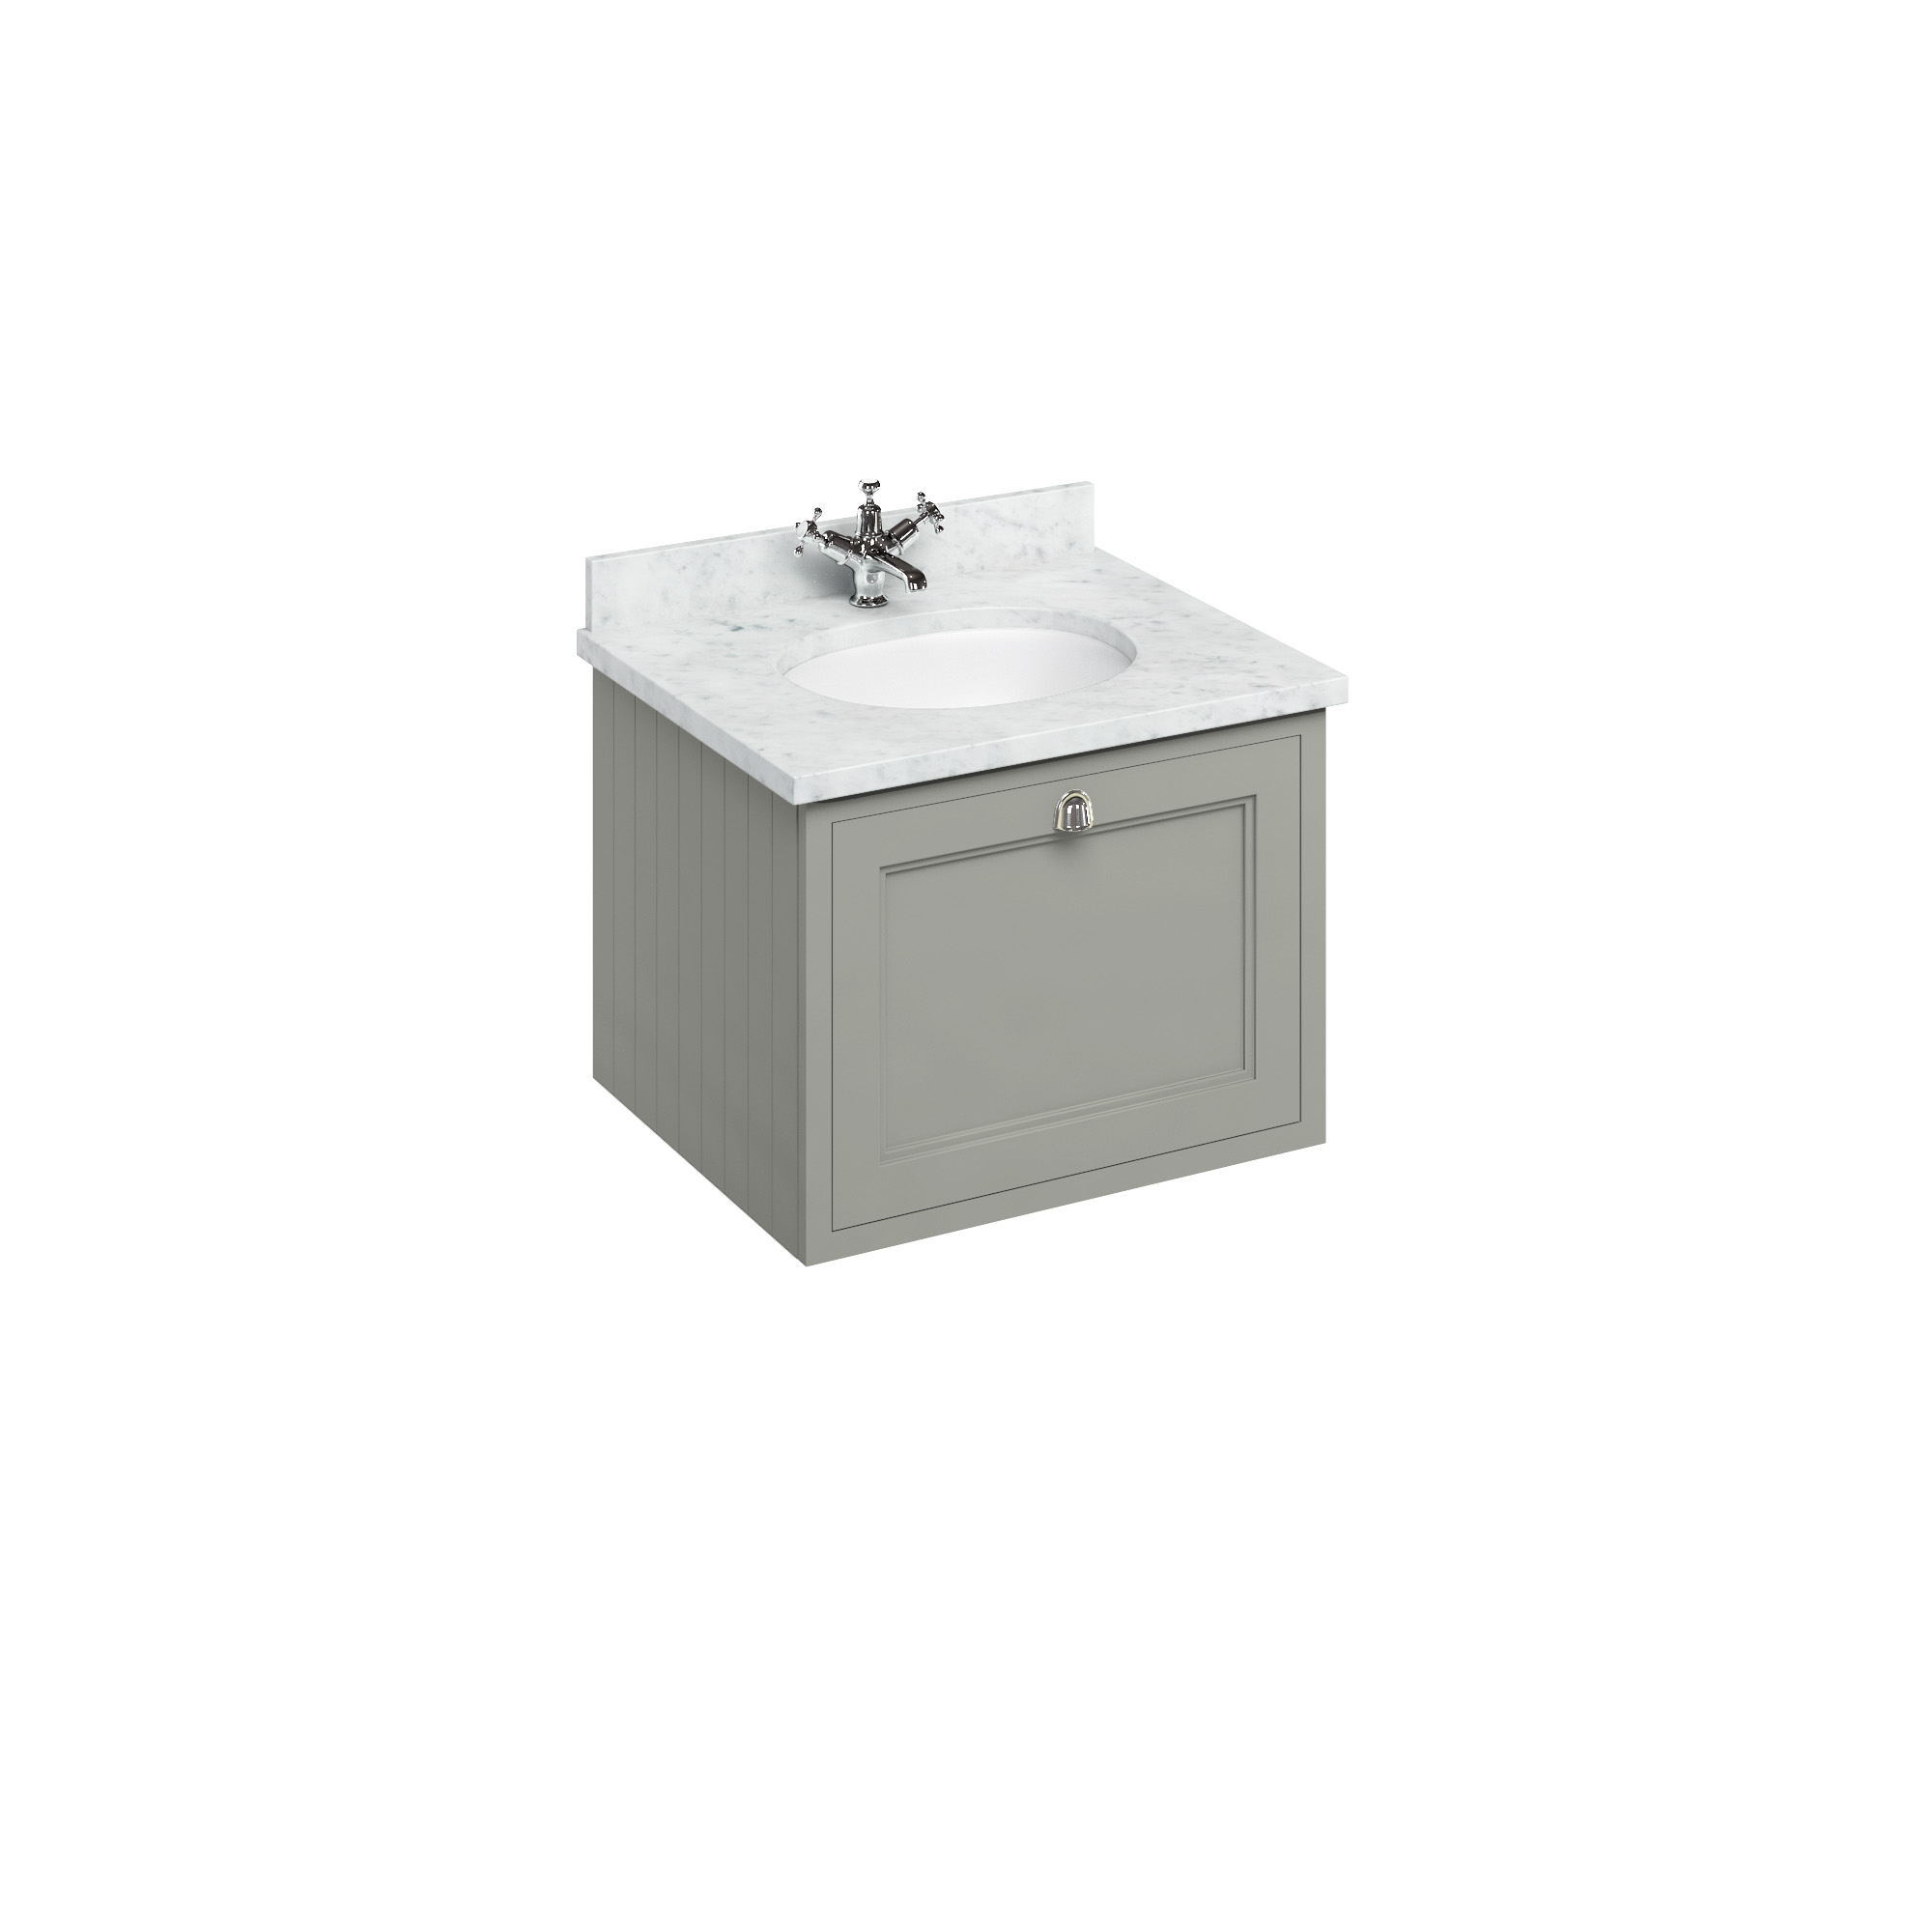 Wall Hung 65 Vanity Unit single drawer - Dark Olive and Minerva Carrara white worktop with integrated white basin